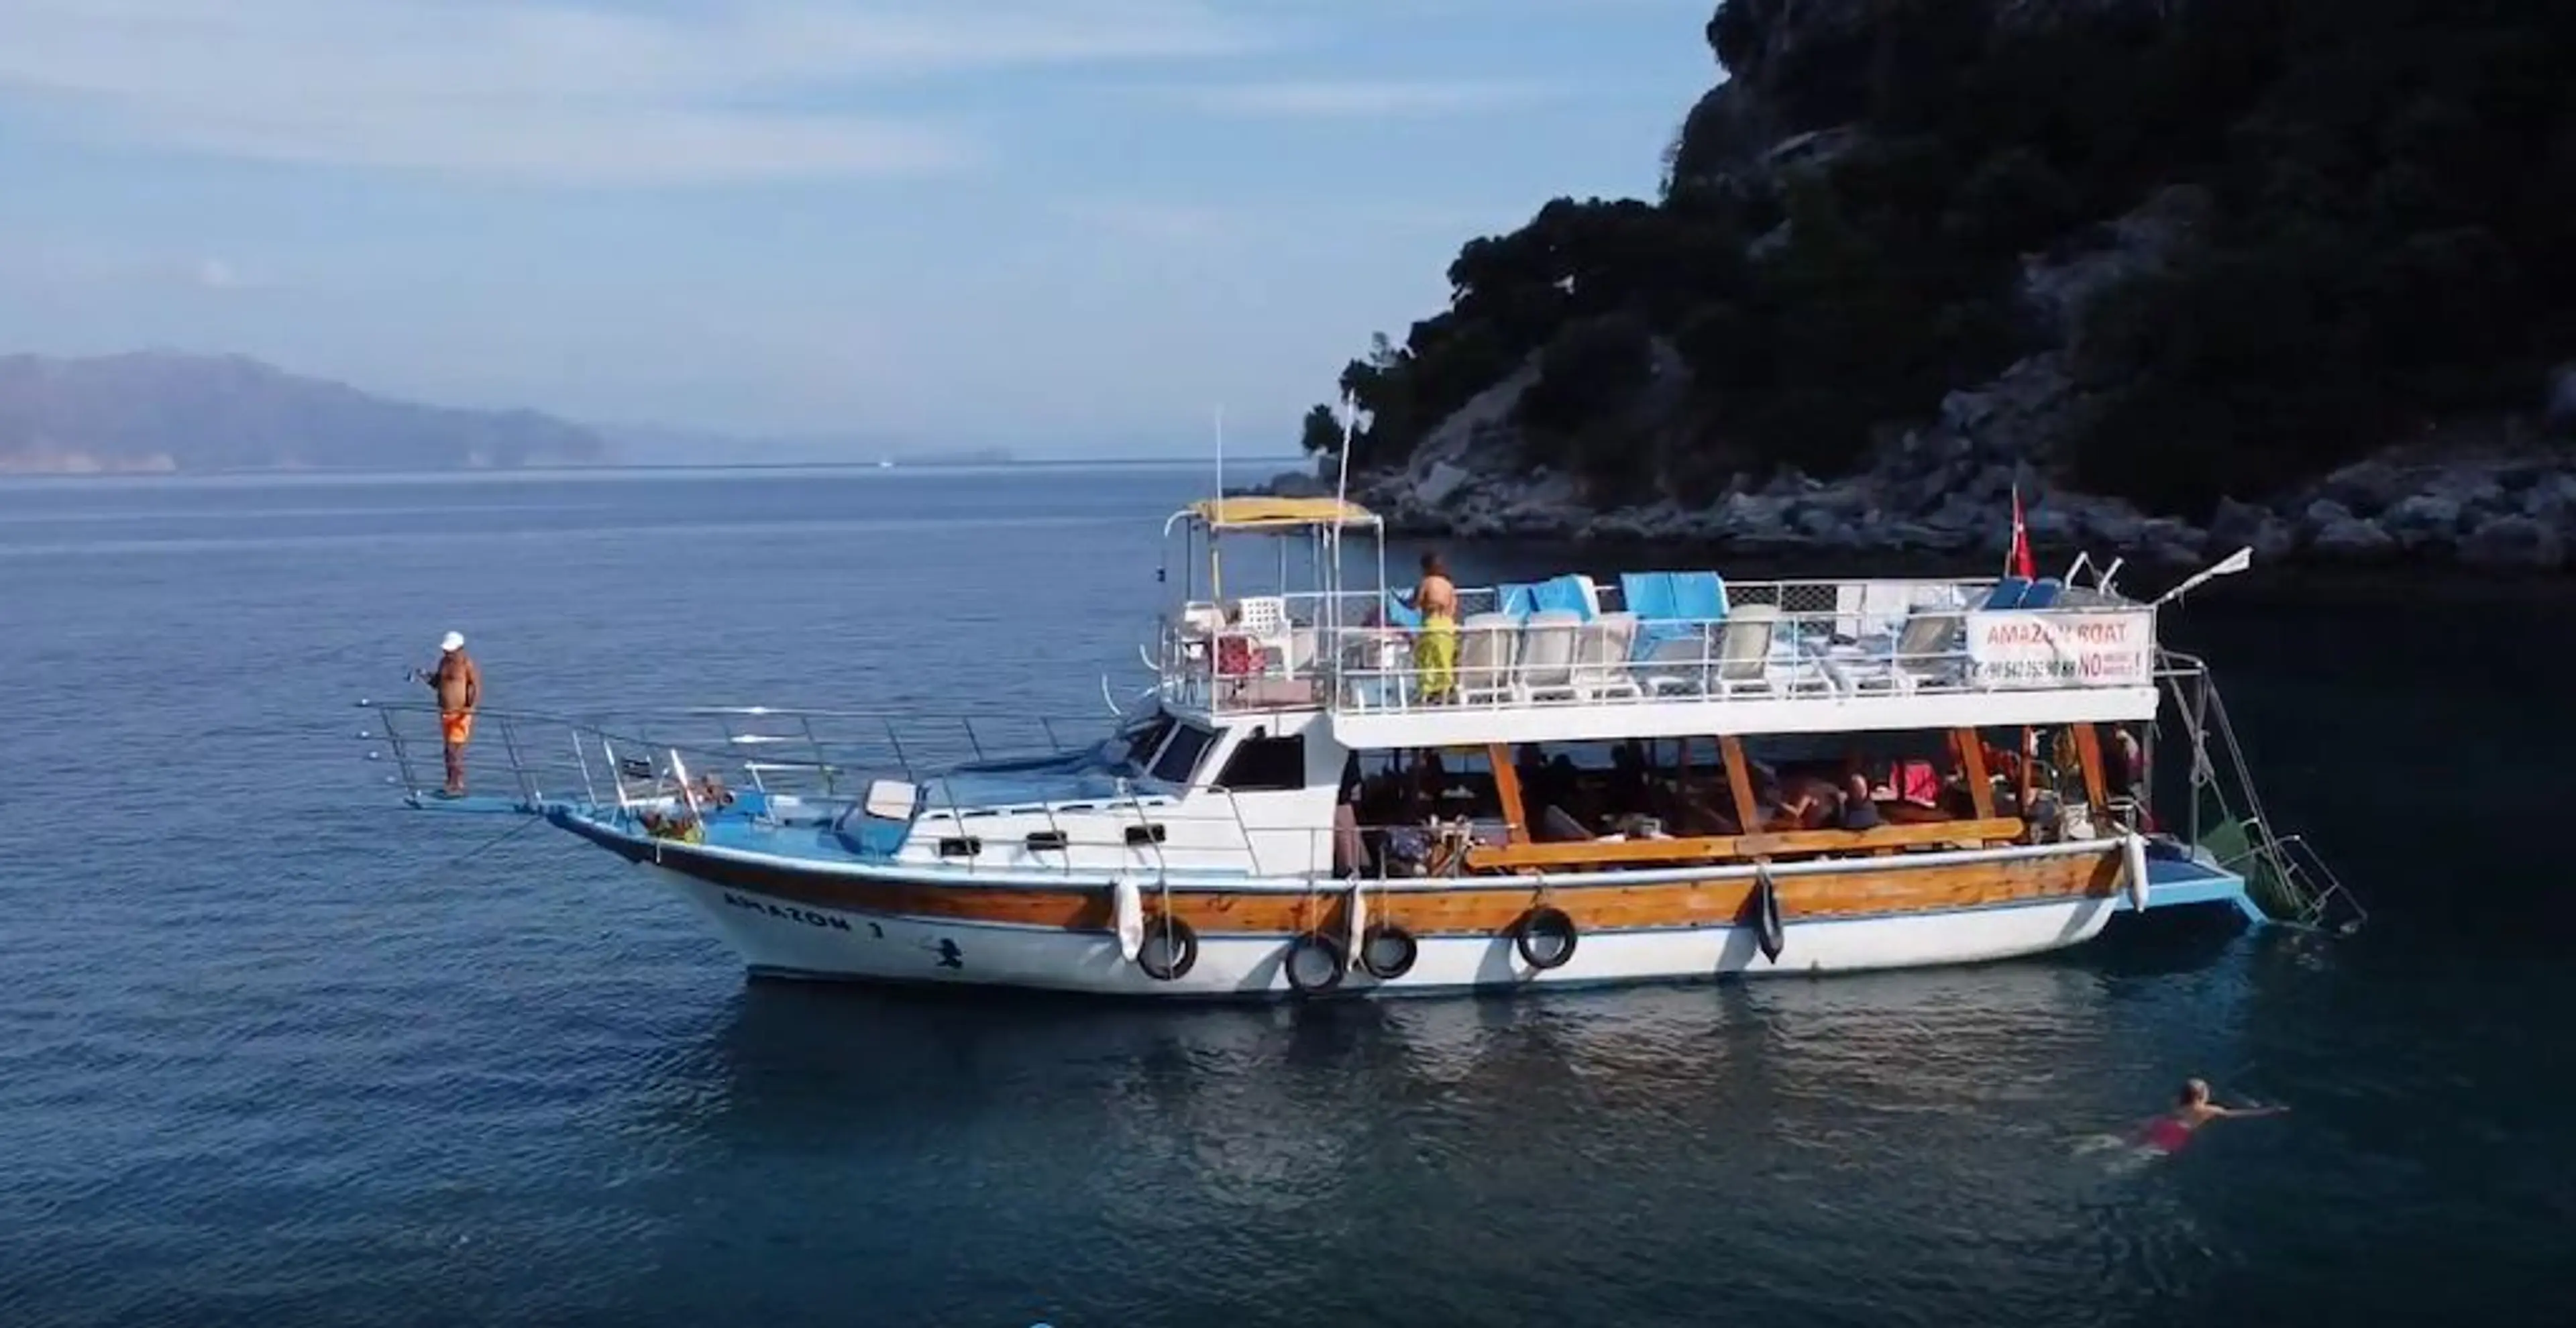 Boat tour of the Marmaris Bay